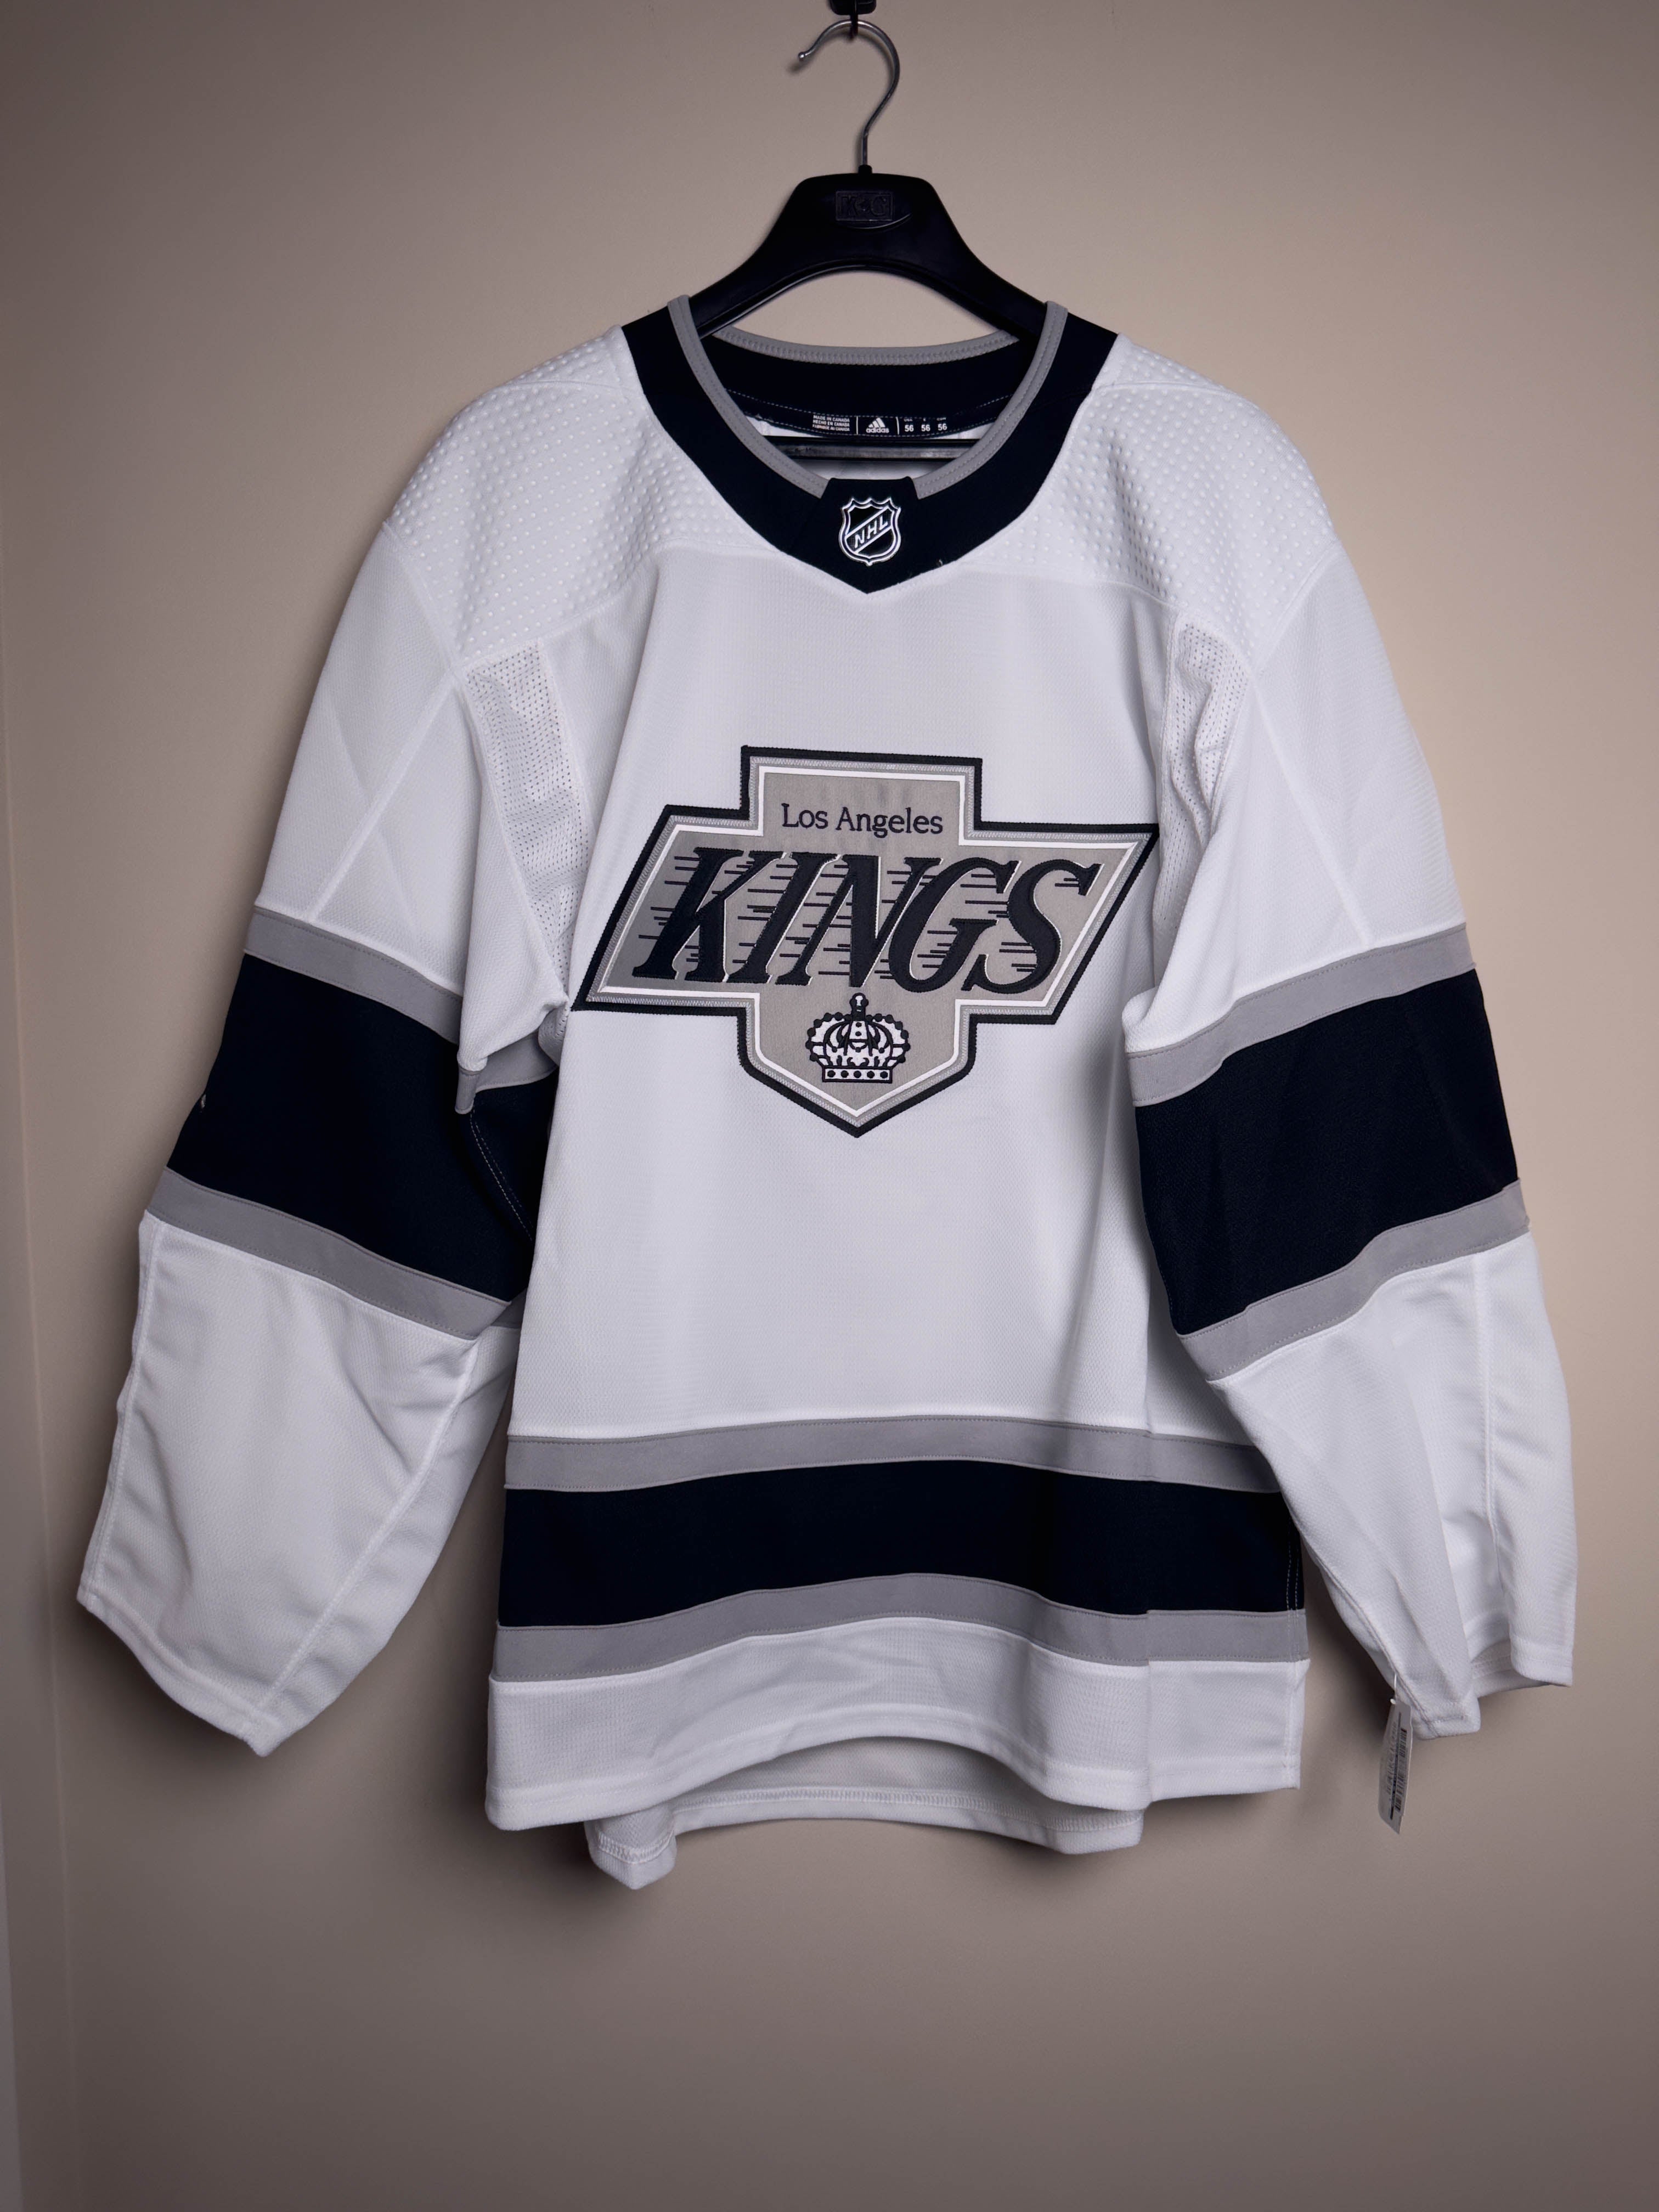 Unboxing a Los Angeles Kings Silver Adidas jersey on the cheap